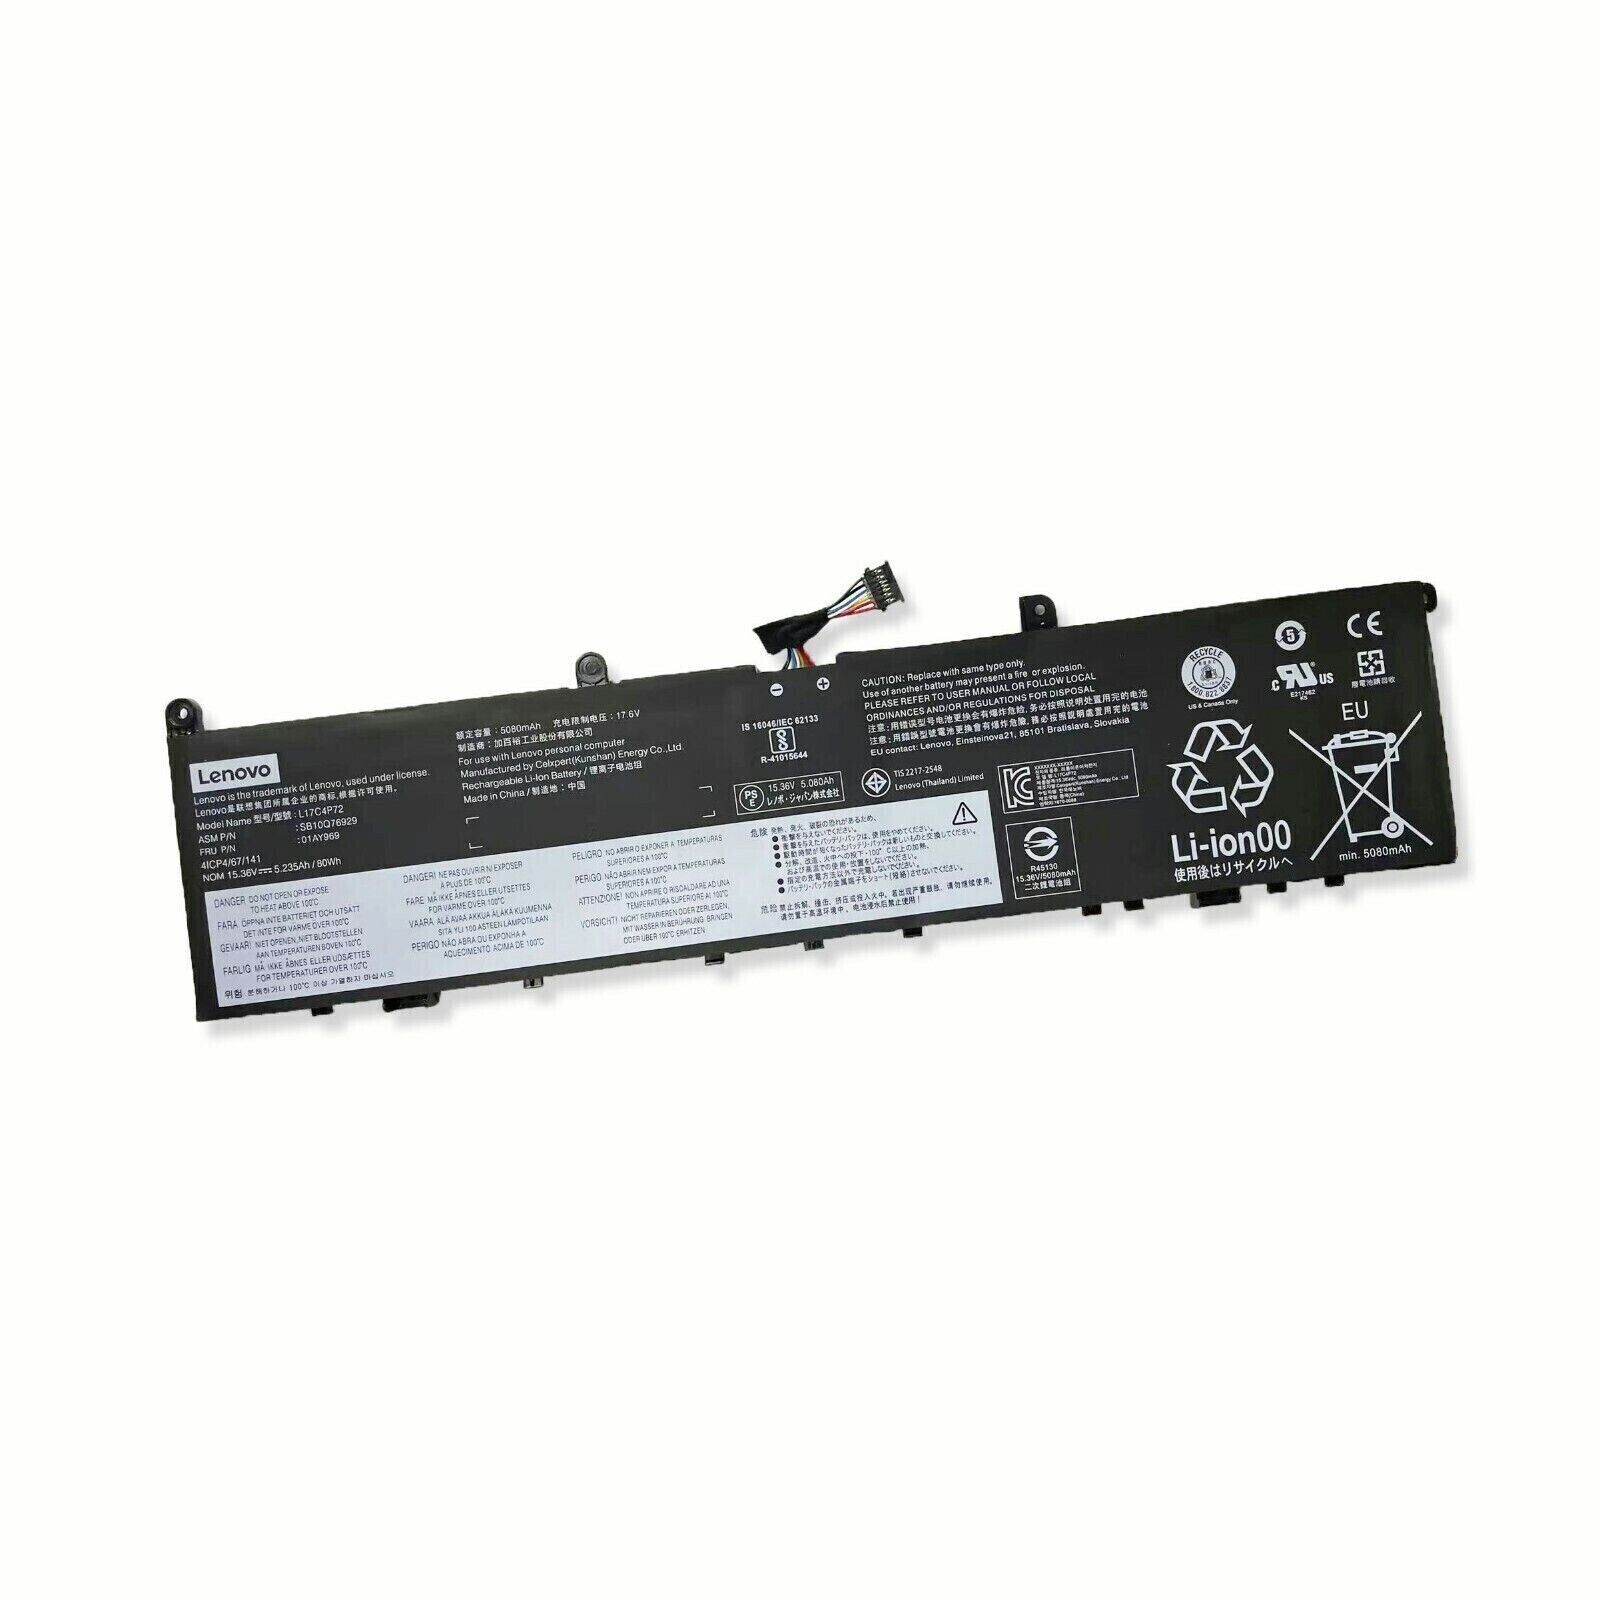 Genuine 01AY969 Battery For Lenovo ThinkPad X1 Extreme 2nd Gen L17C4P72 L18M4P71